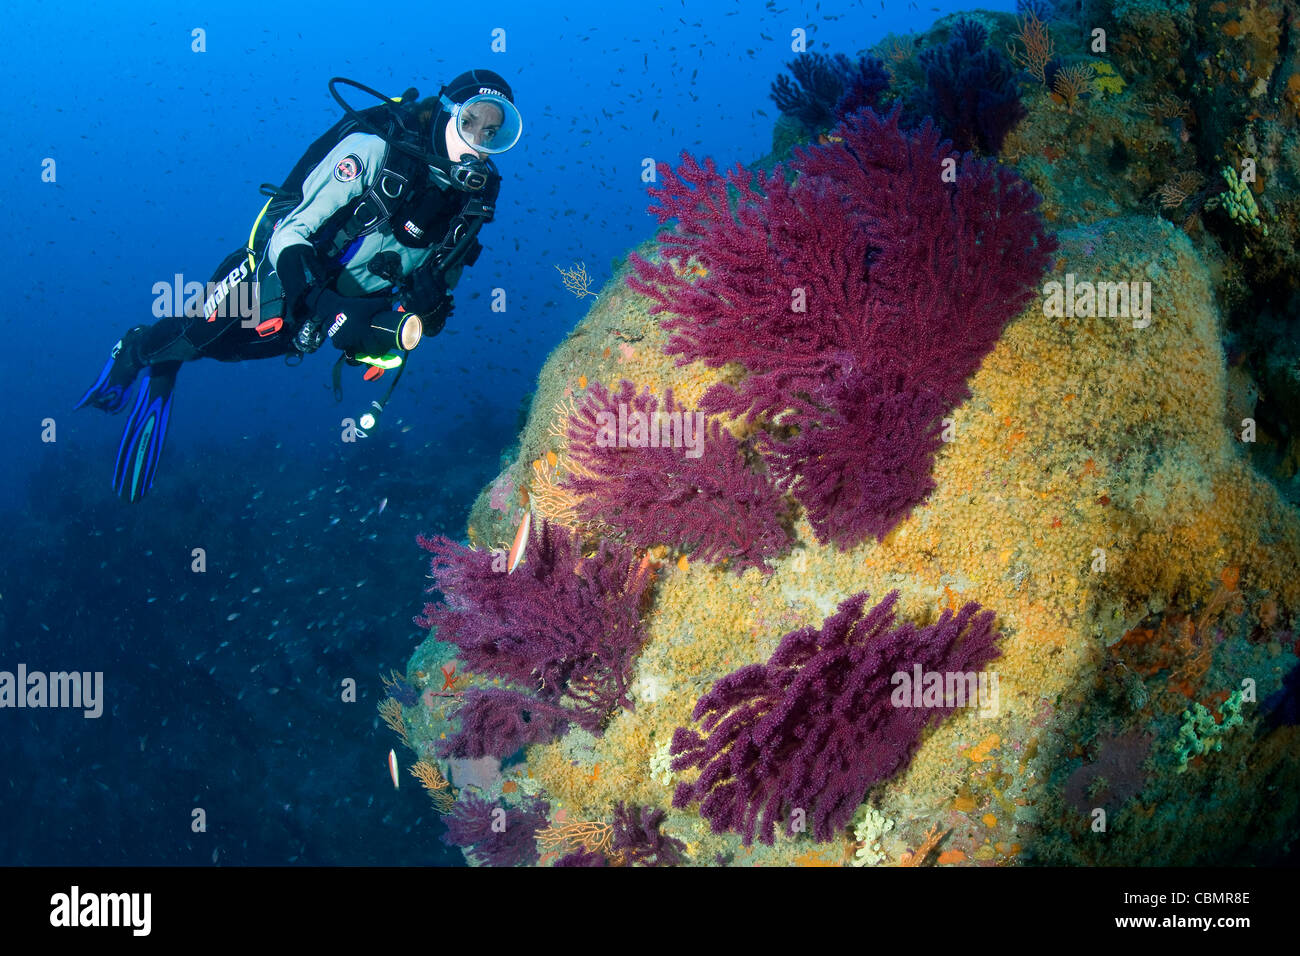 Colorful Gorgonian in Coral Reef and Scuba Diver, Paramuricea clavata, Parazoanthus axinellae, Ischia, Mediterranean Sea, Italy Stock Photo